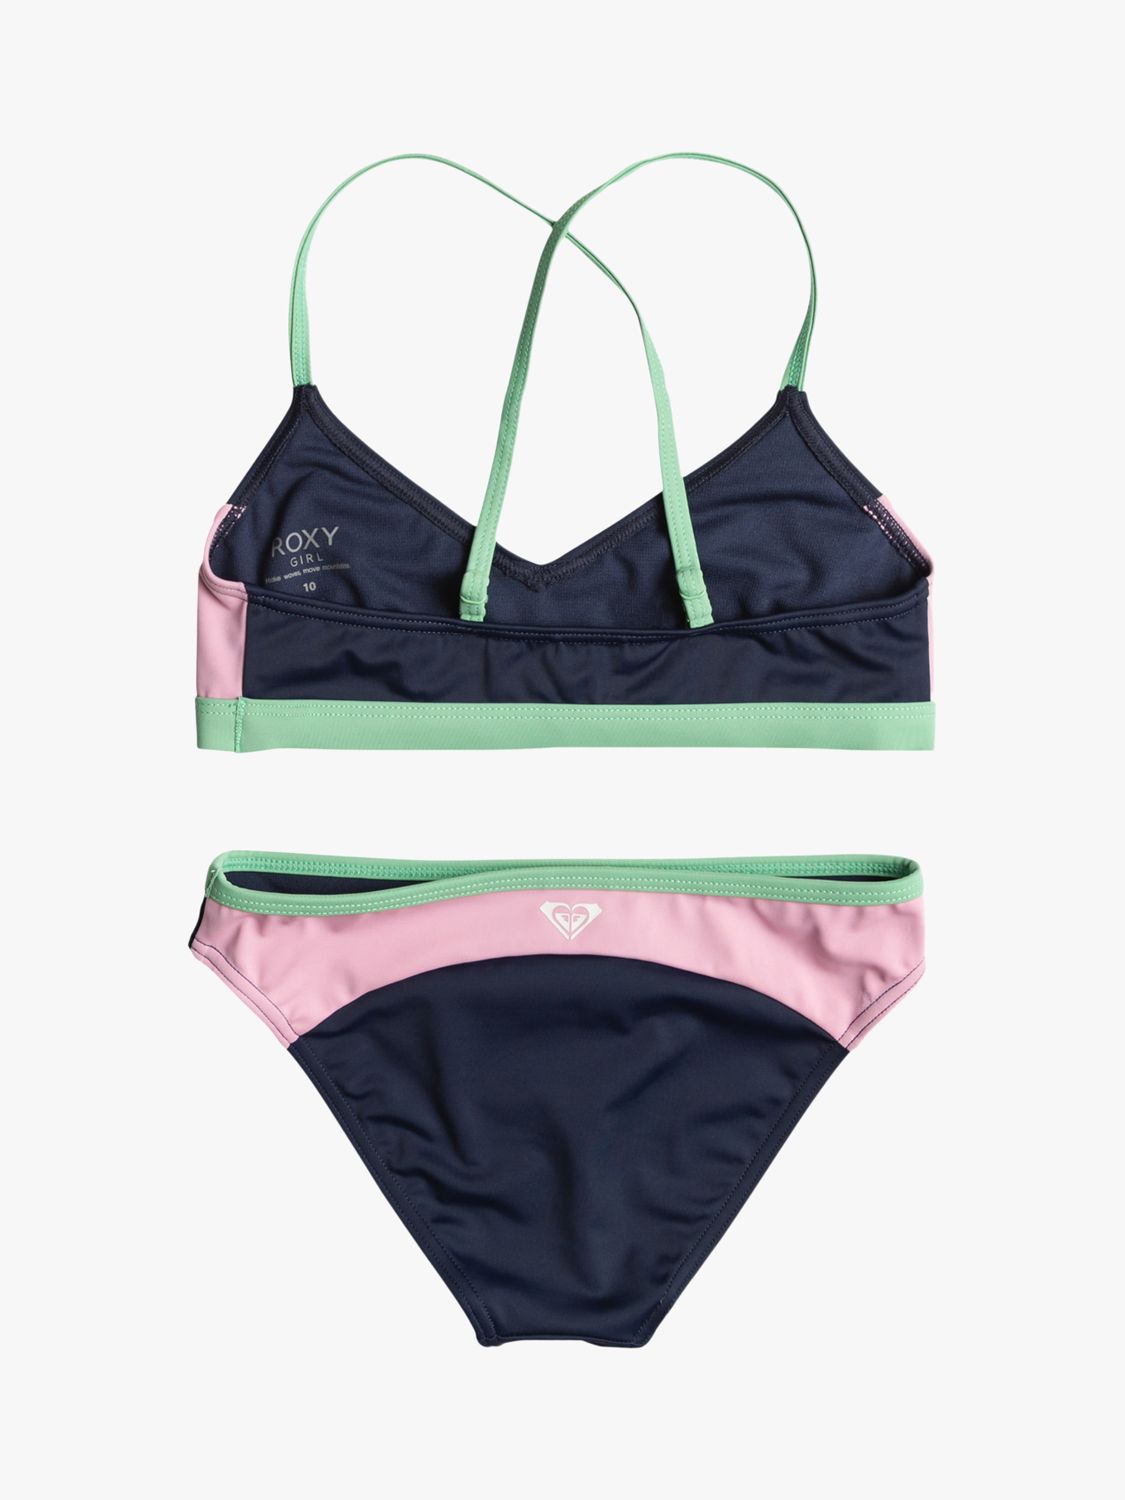 Buy Roxy Kids' Ilacabo Collection Athletic Two-Piece Bikini Set, Naval Academy Online at johnlewis.com